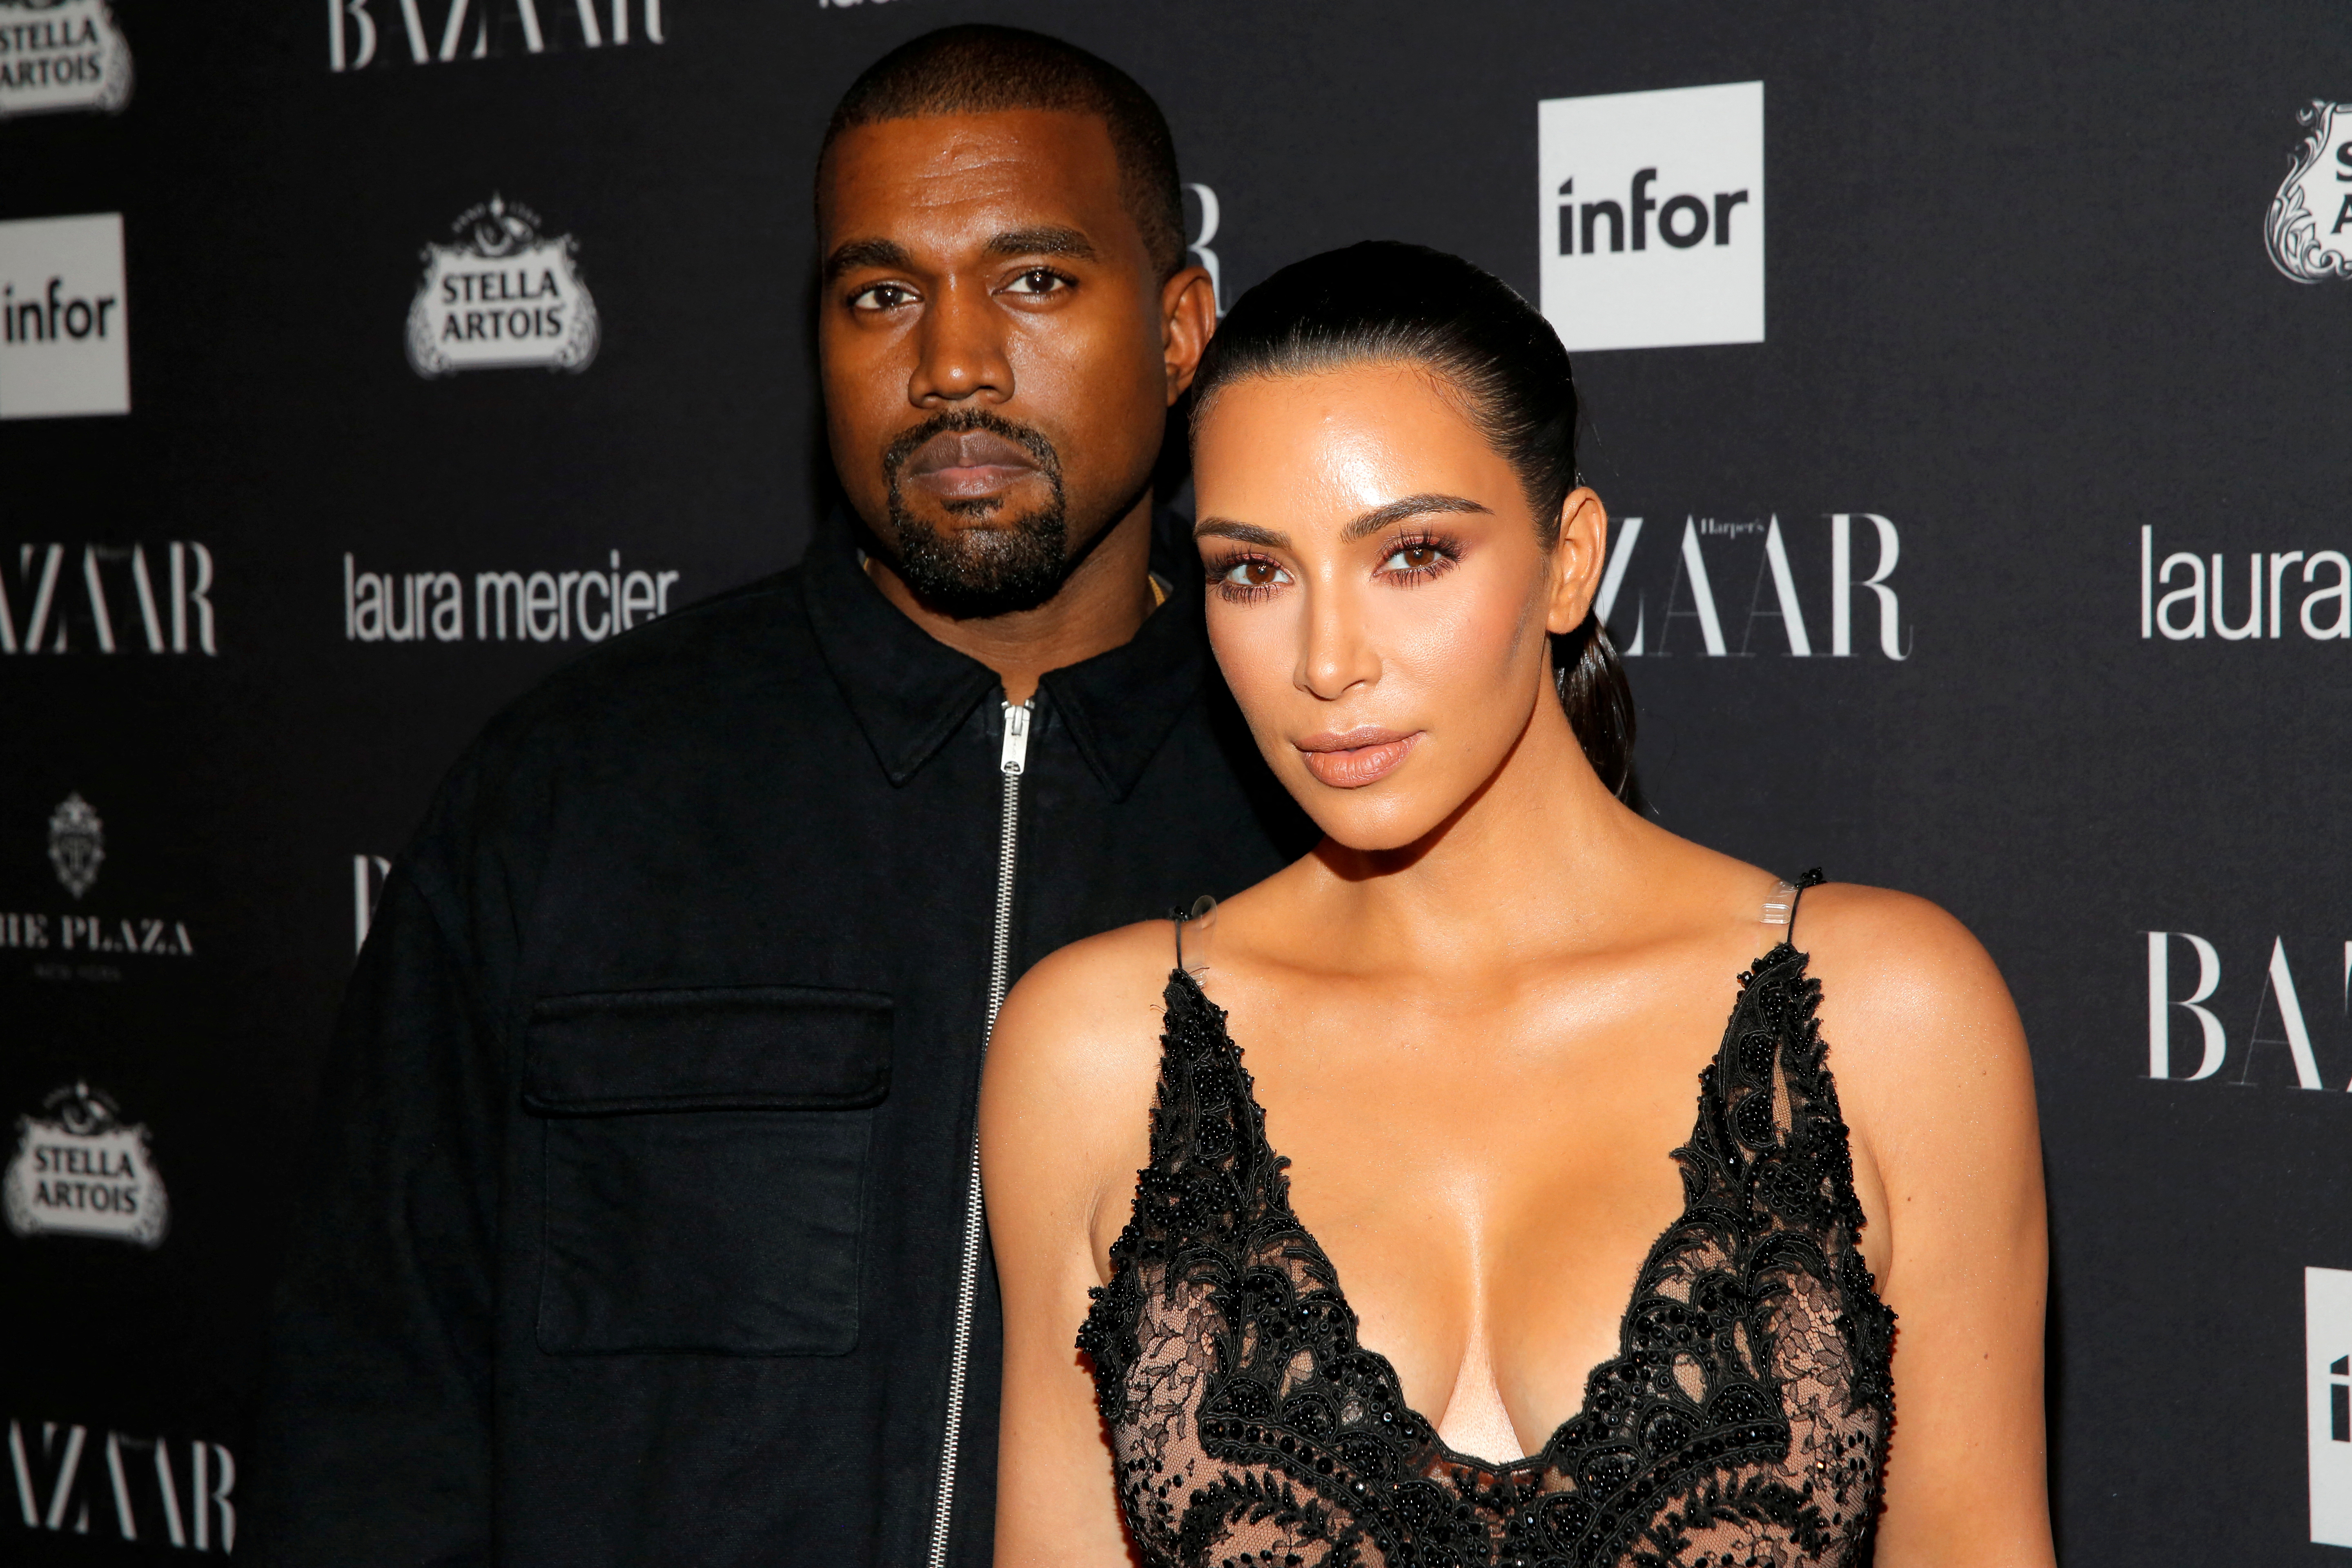 Kanye West and Kim Kardashian attend Harper's Bazaar's celebration of 'ICONS By Carine Roitfeld' at The Plaza Hotel during New York Fashion Week in Manhattan, New York, U.S.